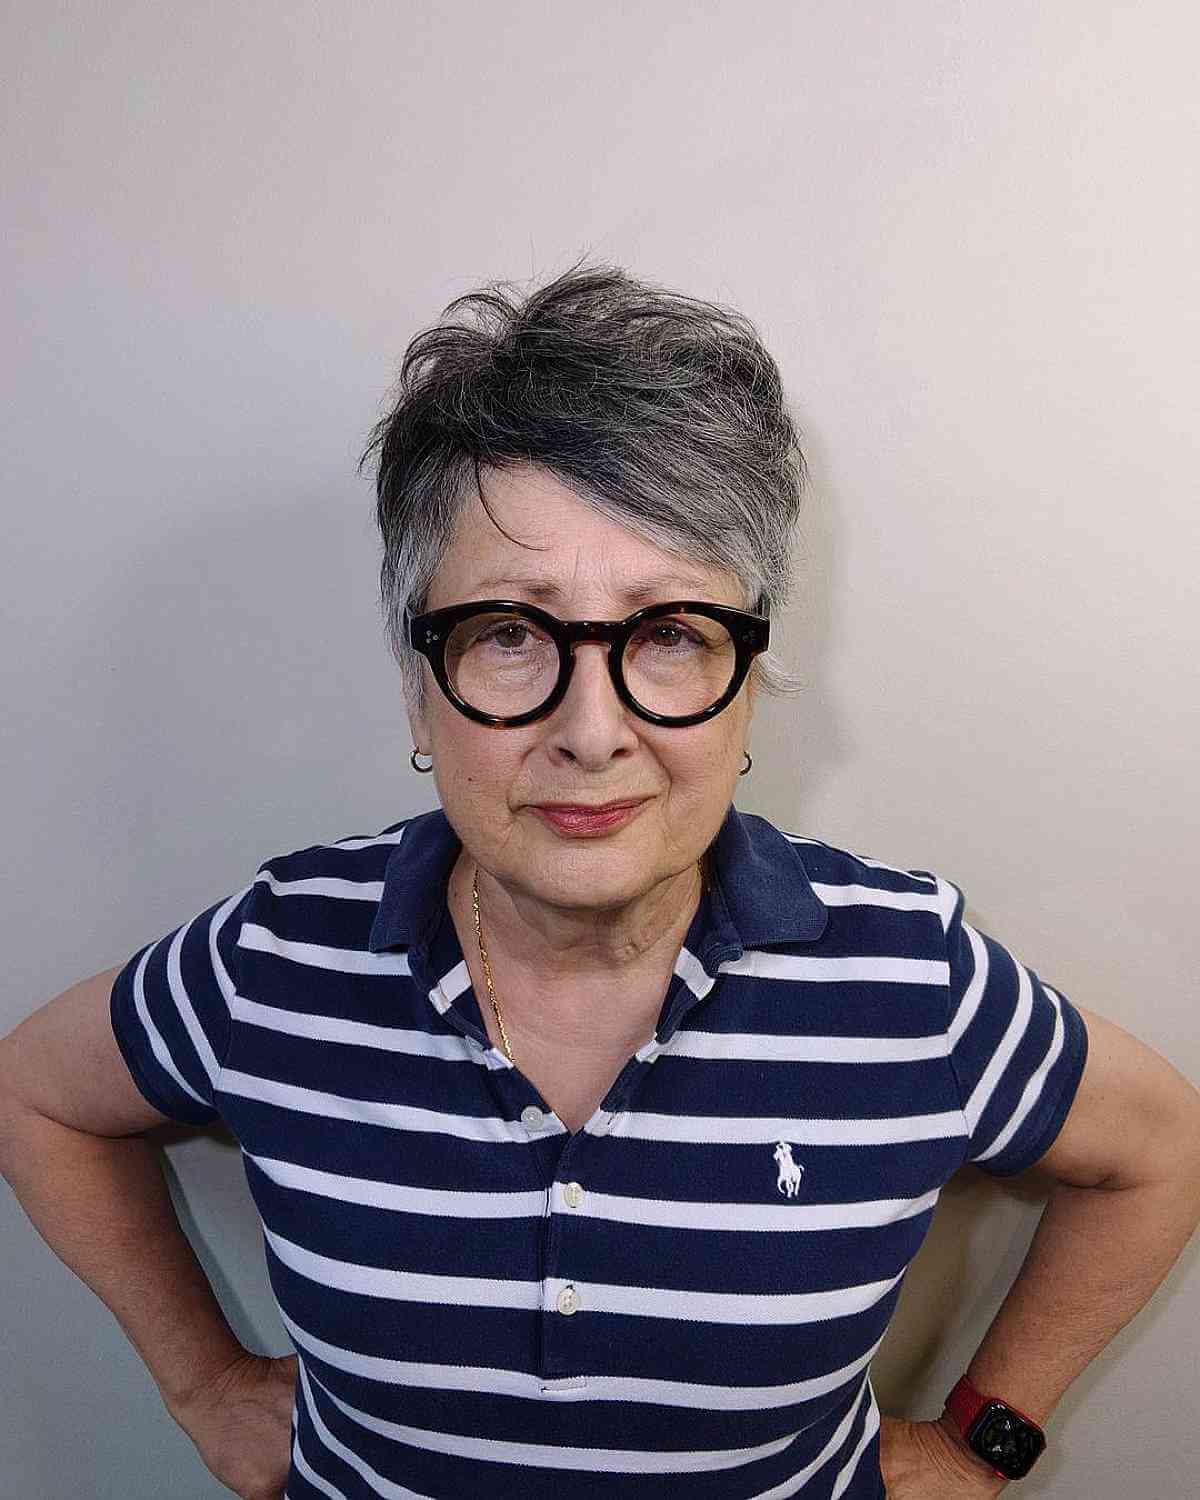 Silver Side-Swept Pixie for an Old Lady with Glasses